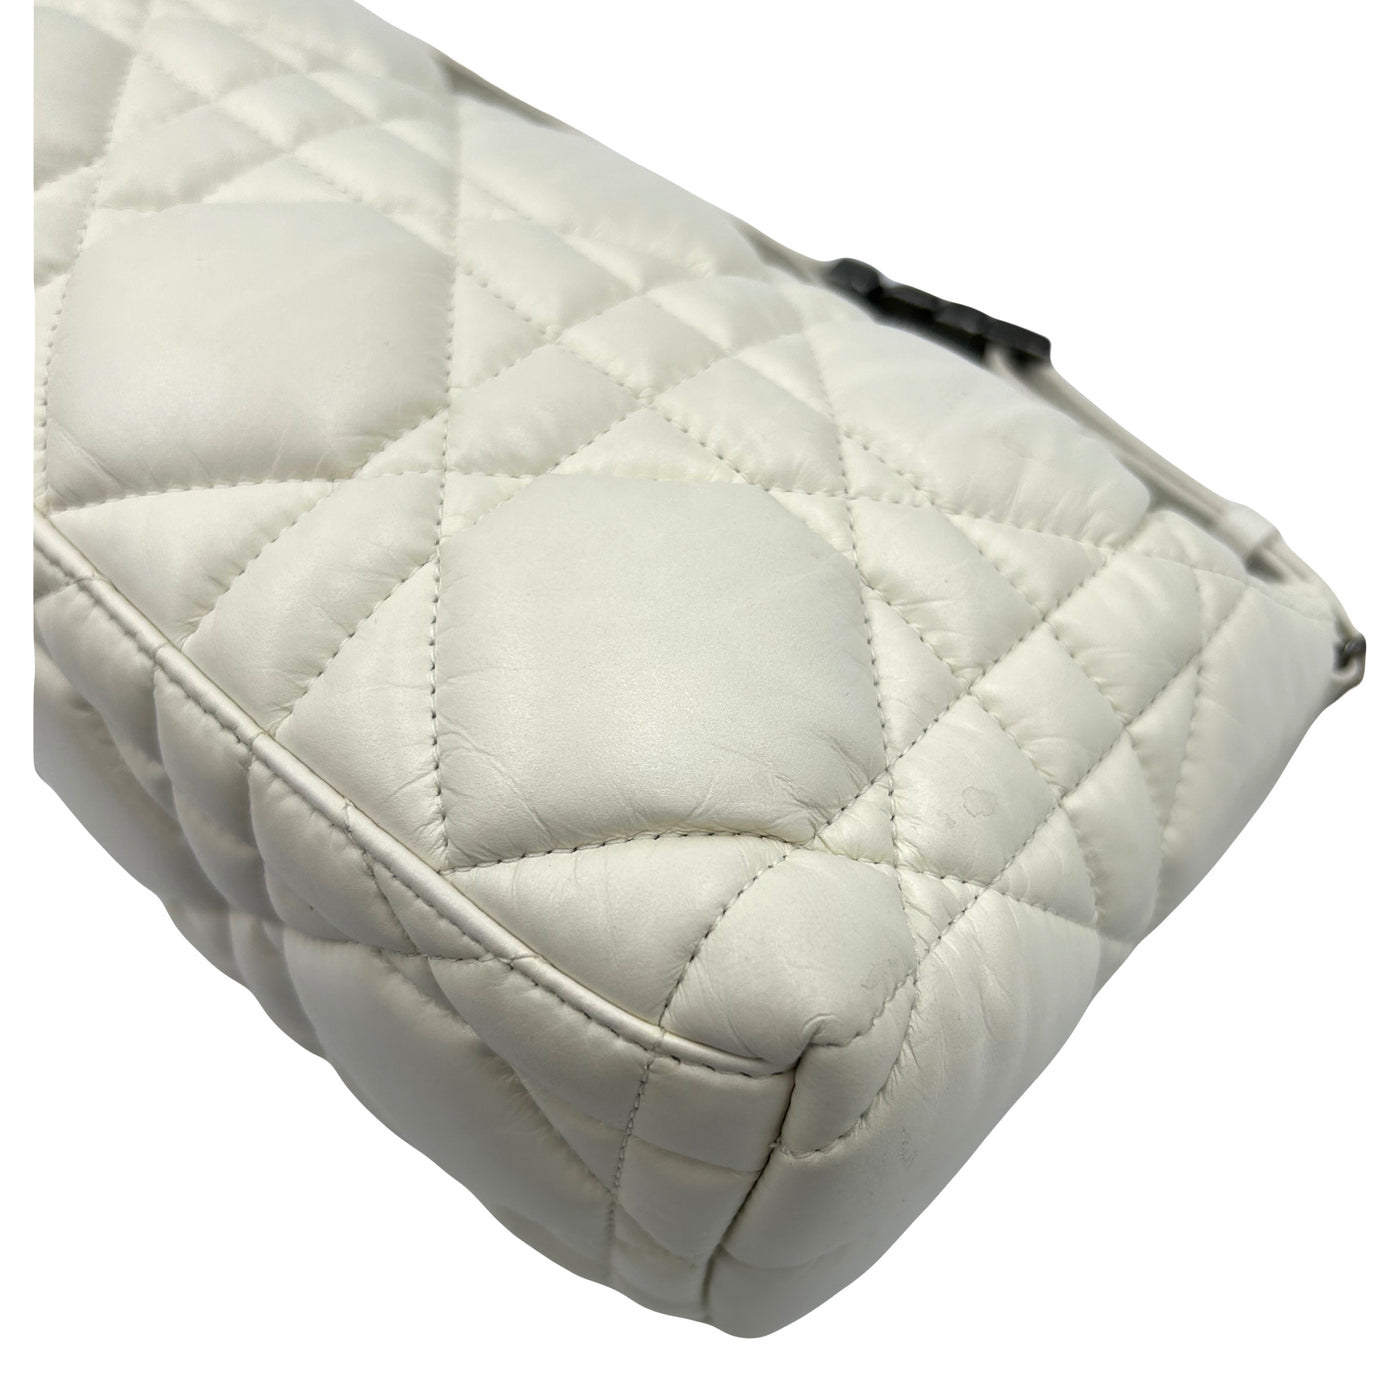 Christian DIOR White Nomad Travel leather pouch RRP: £1700